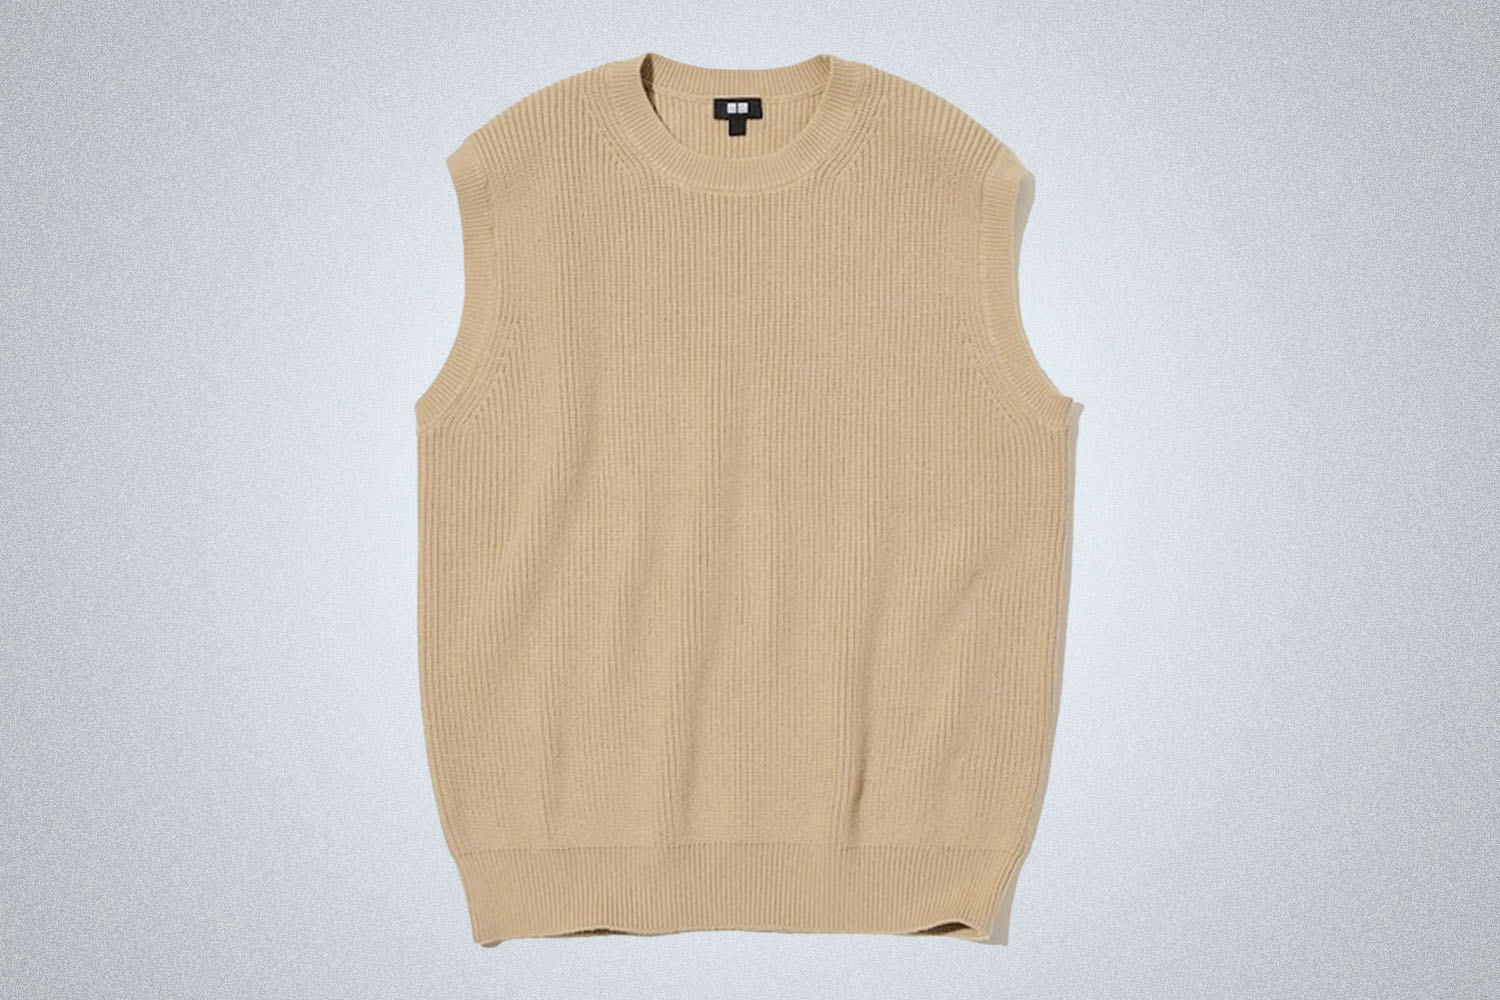 The Solo Sweater Vest: Uniqlo Middle Gauge Crew Neck Knitted Vest